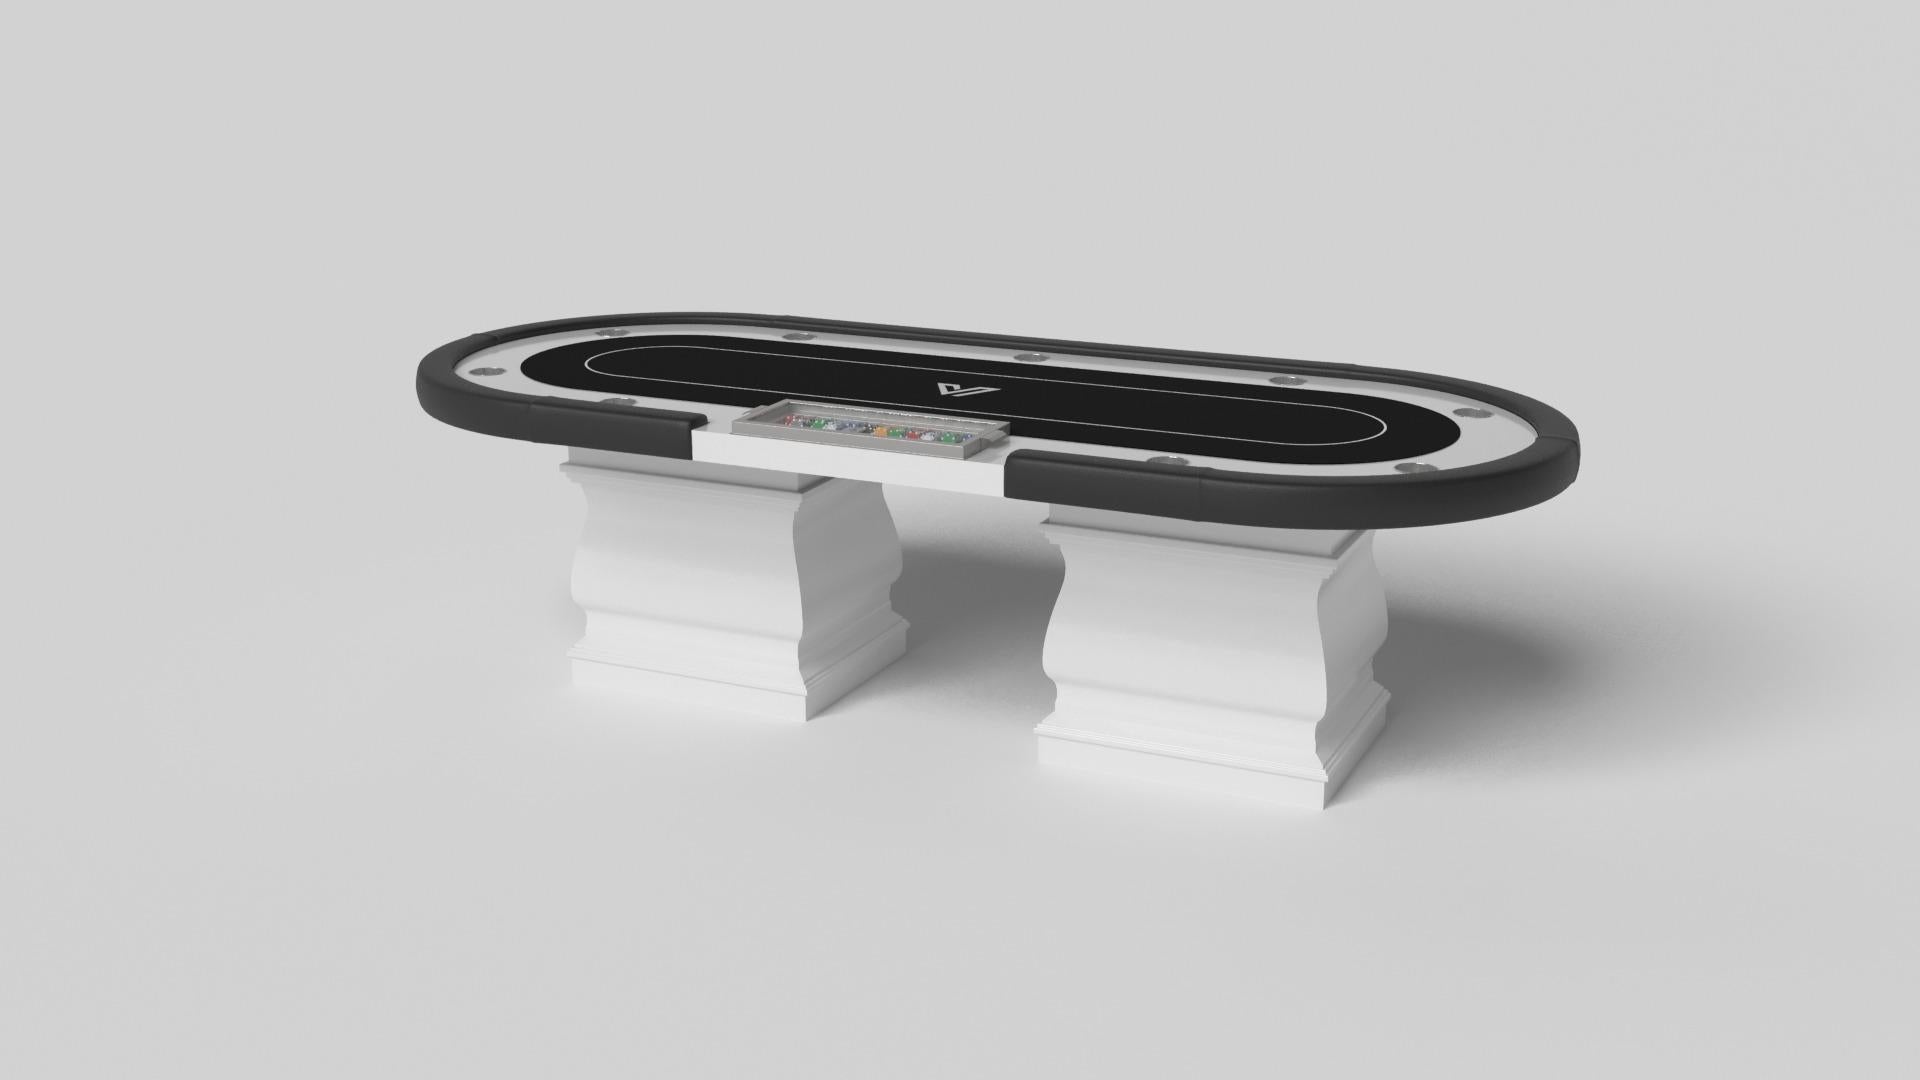 Two hand-sculpted legs bestow a sense of classic style upon this handcrafted poker table in white. This luxury wood game table features a smooth rectangular top perched upon two wide baluster column legs that mimic the curves and lines of crown